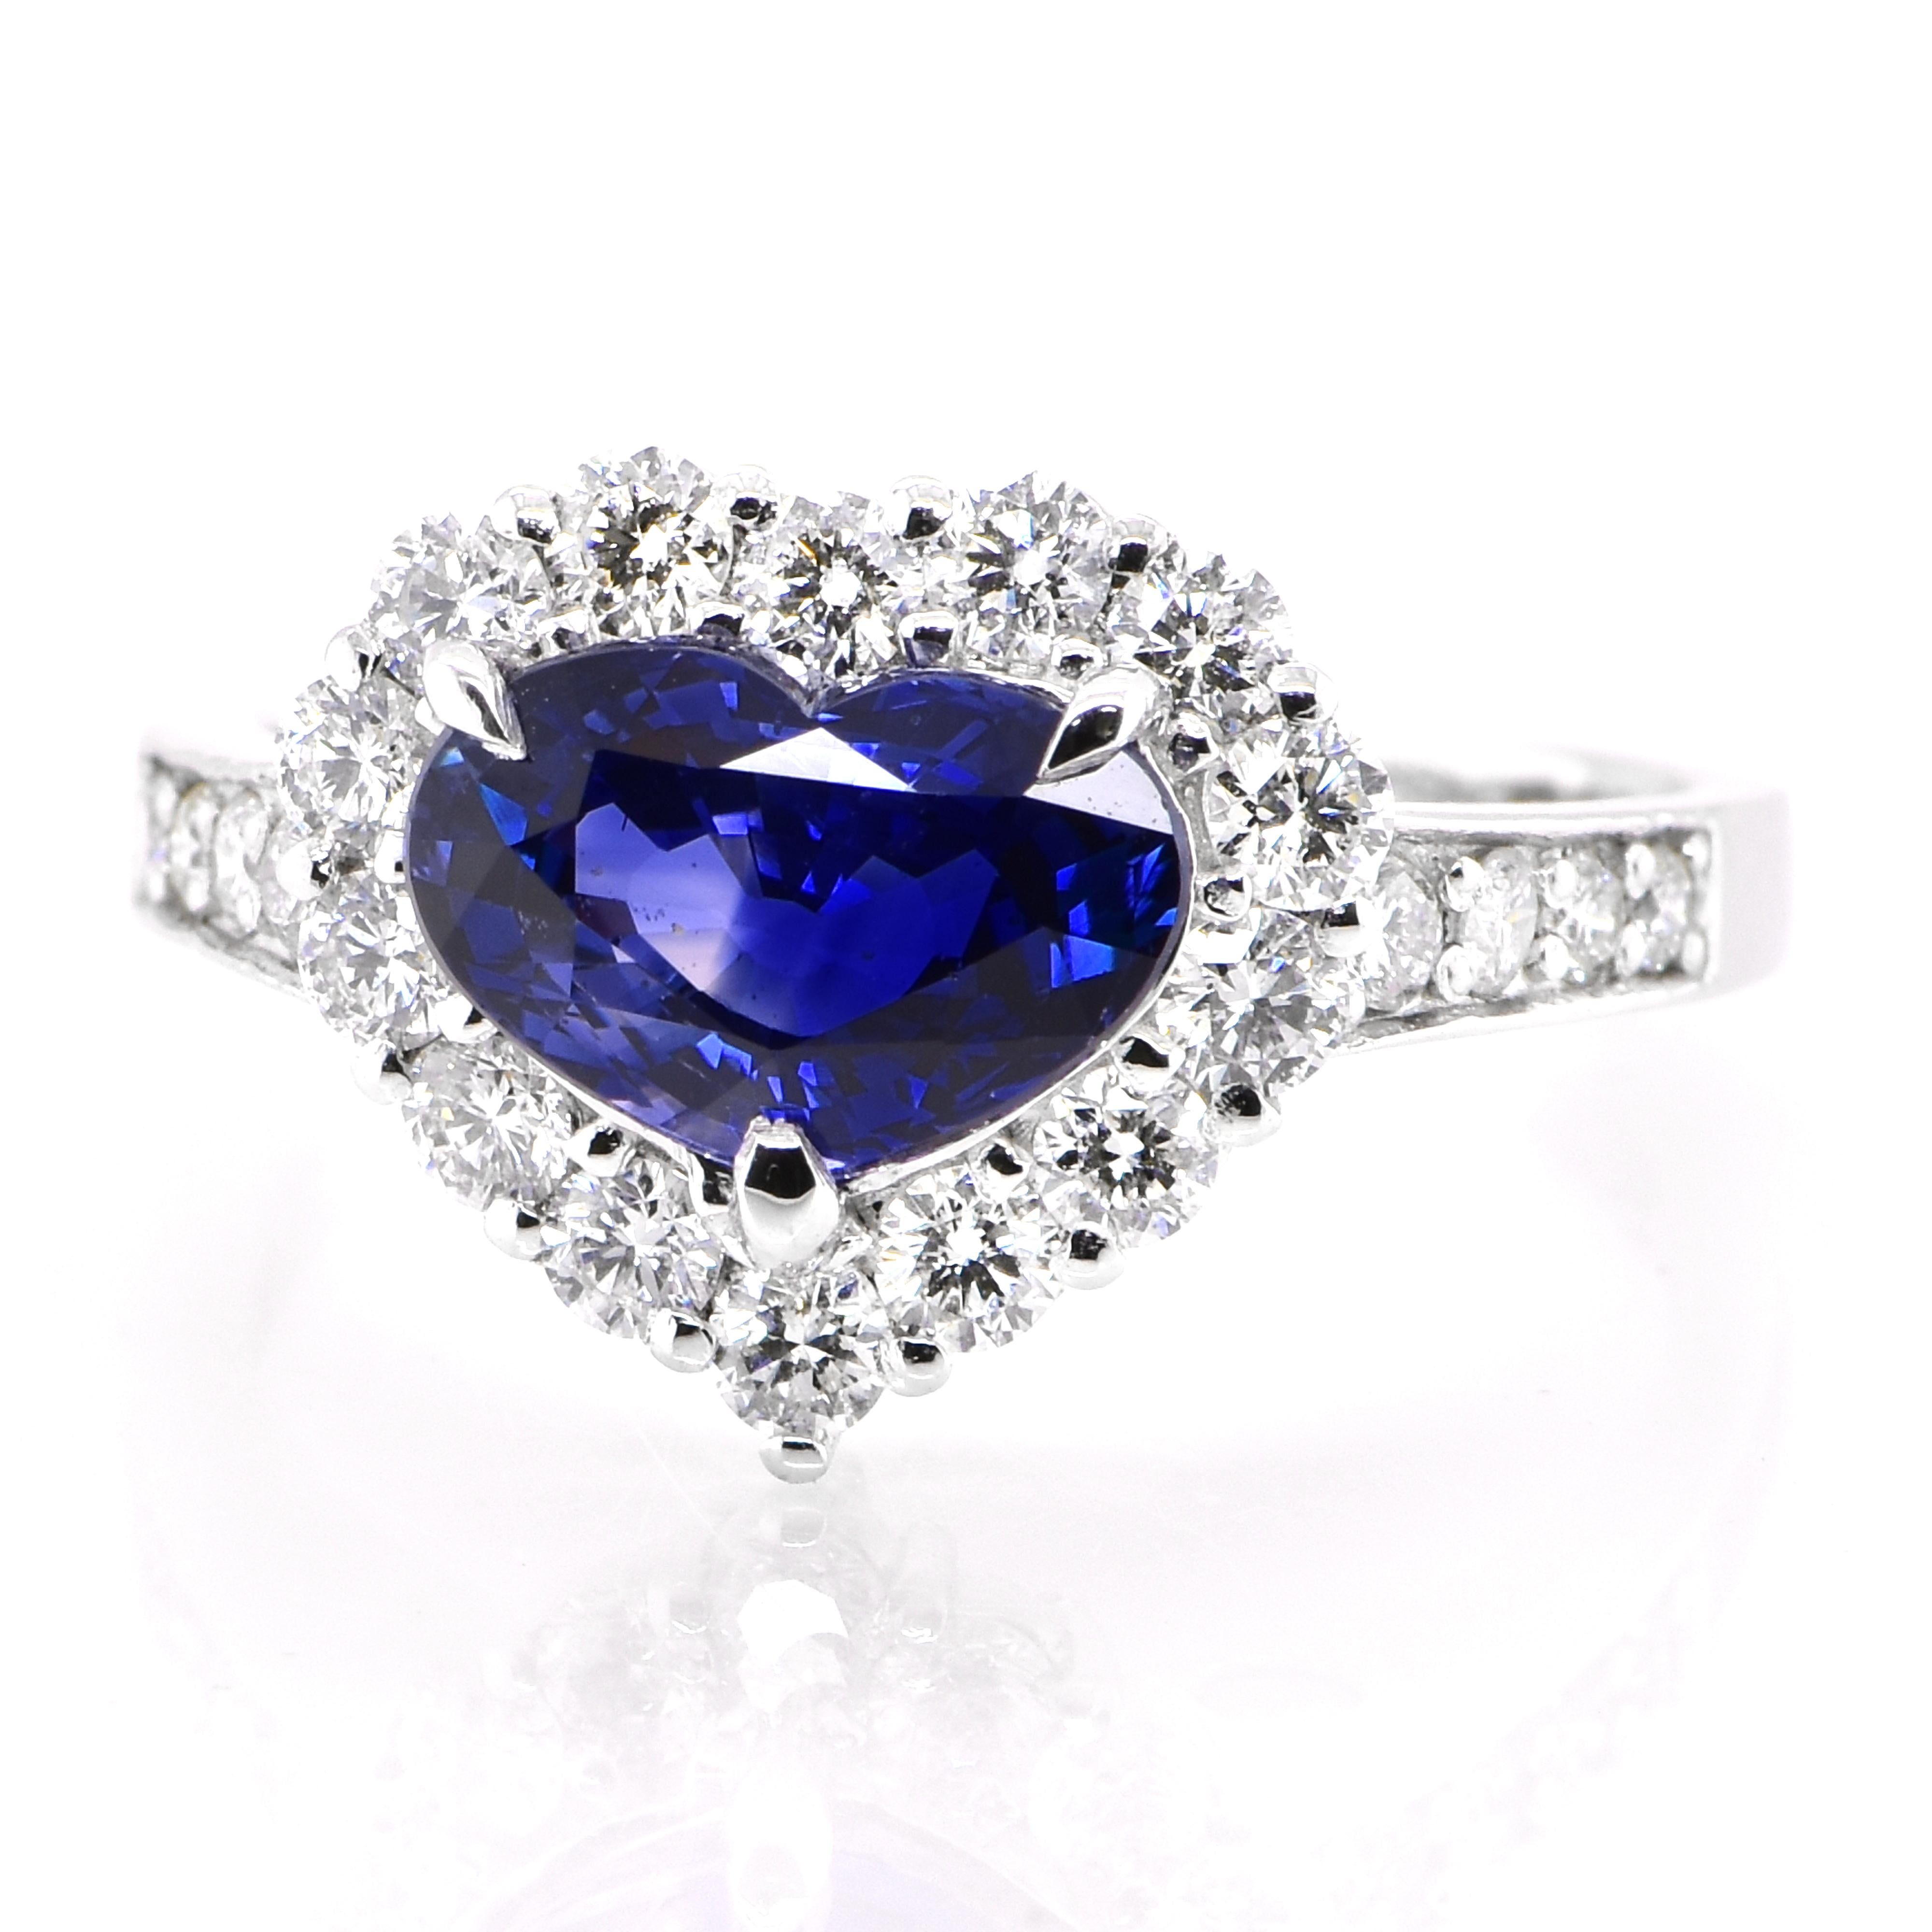 A beautiful ring featuring 2.07 Carat Natural Blue Sapphire and 0.67 Carats Diamond Accents set in Platinum. Sapphires have extraordinary durability - they excel in hardness as well as toughness and durability making them very popular in jewelry.